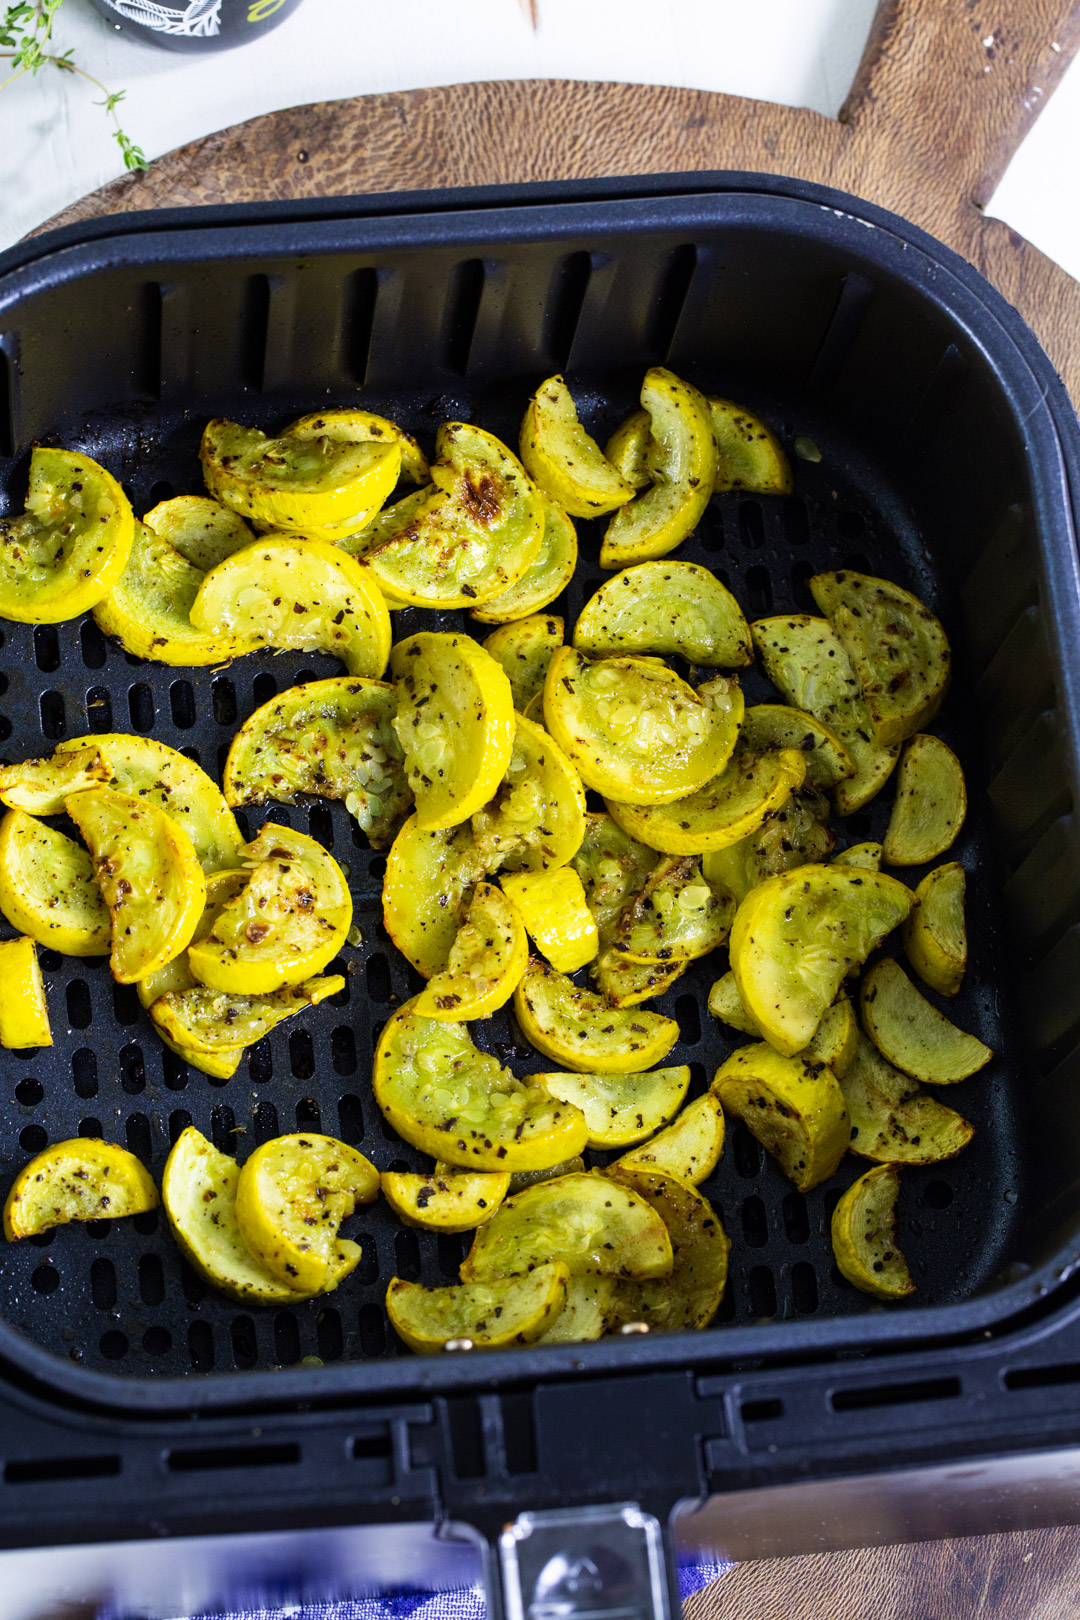 Cooked squash in air fryer basket.